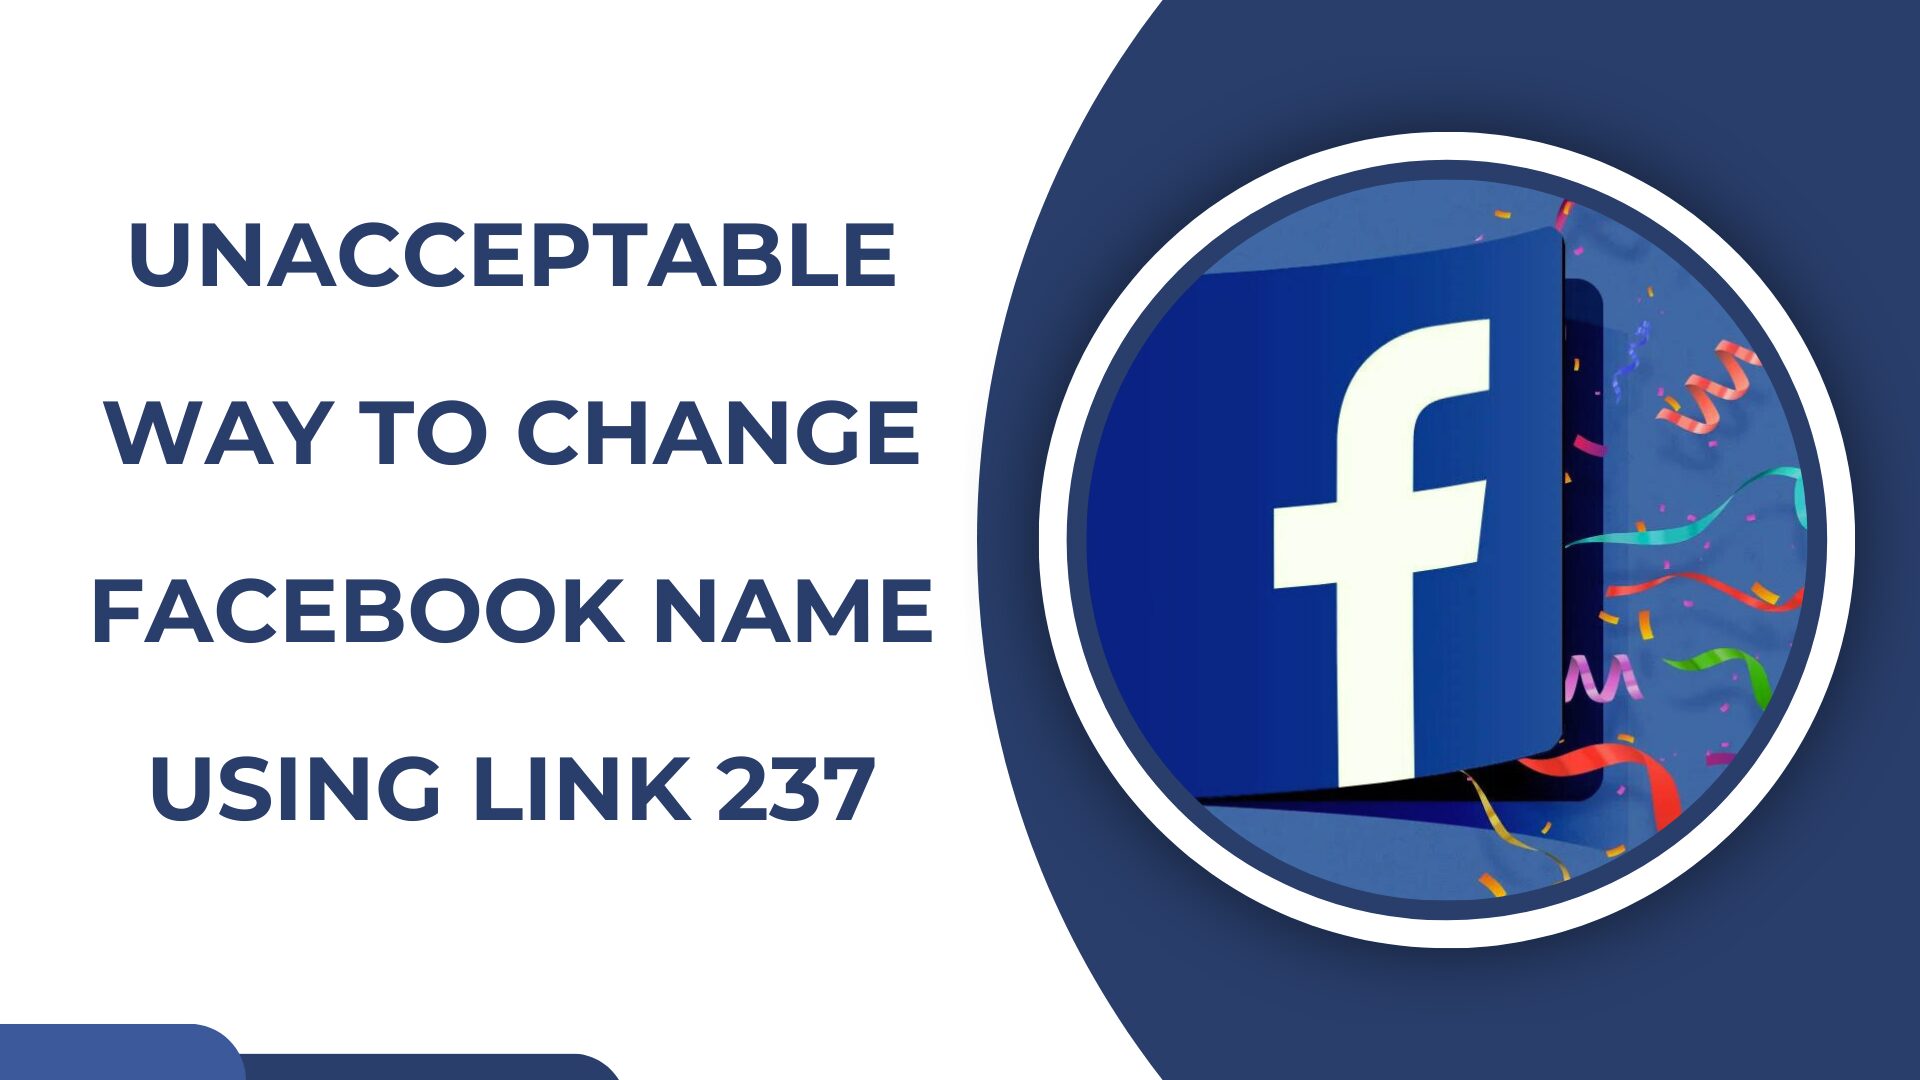 Unacceptable way to change Facebook name using Link 237